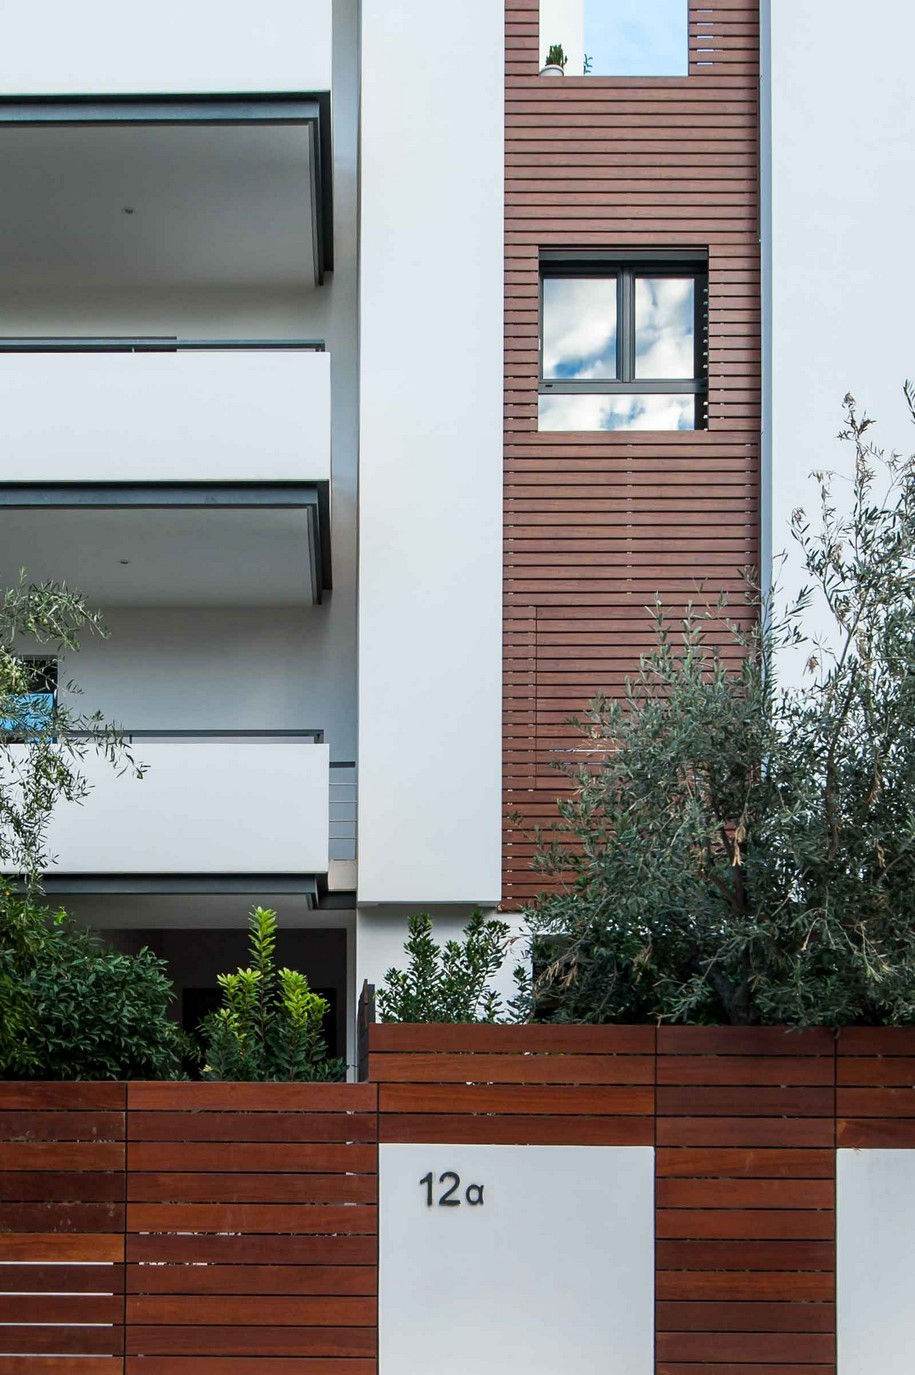 Archisearch Seamless Insert a Garden into a Multi-Level Housing Block in the Athenian Suburbs